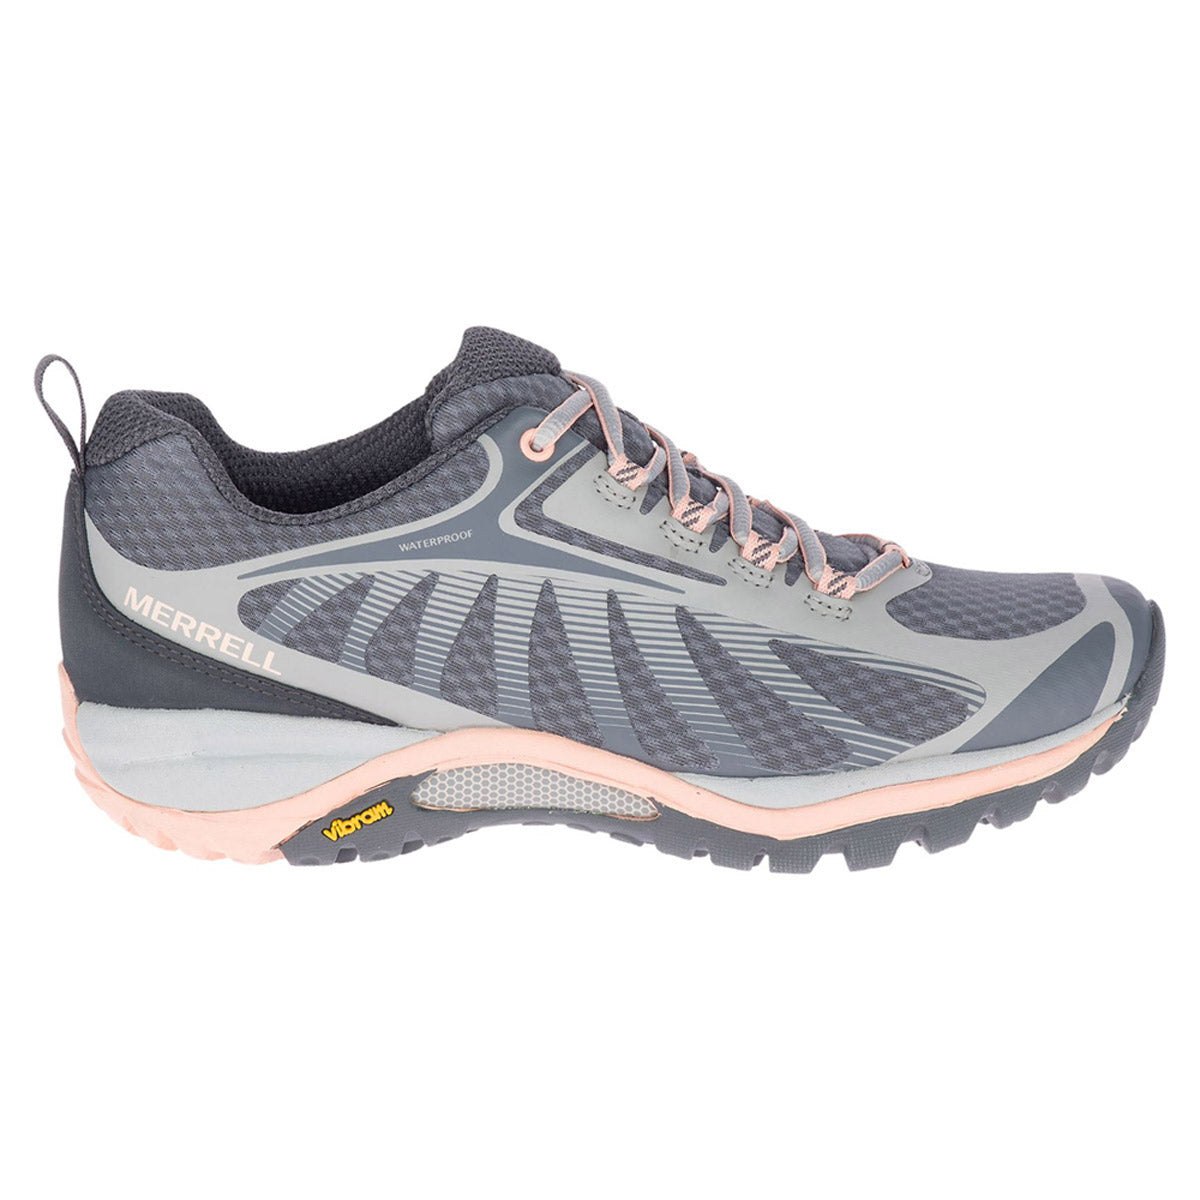 Gray and pink Merrell Siren Edge 3 Waterproof Paloma/Peach hiking shoe with Vibram® Megagrip sole, isolated on a white background.